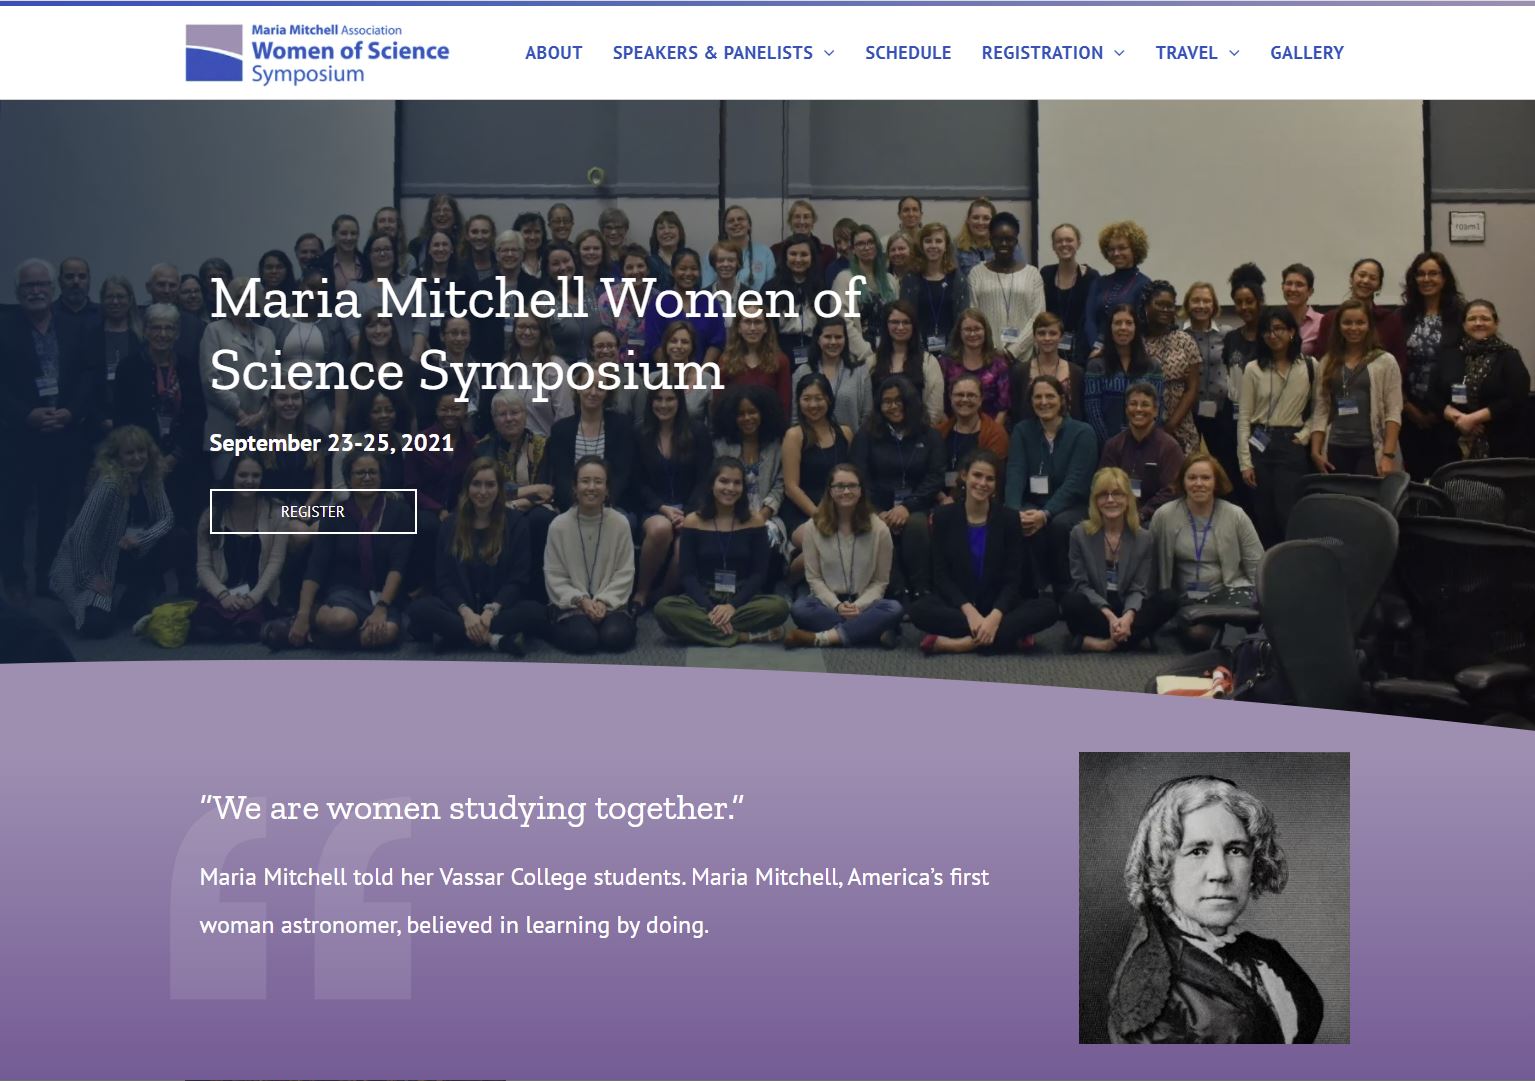 Picture of splash page for Maria Mitchel Women of Science Symposium, showing assembled participants from last session with text overlay displaying the dates of next event: September 23 to 25, 2021. Lower half of image shows portrait of Mitchell with quote "We are women studying together."